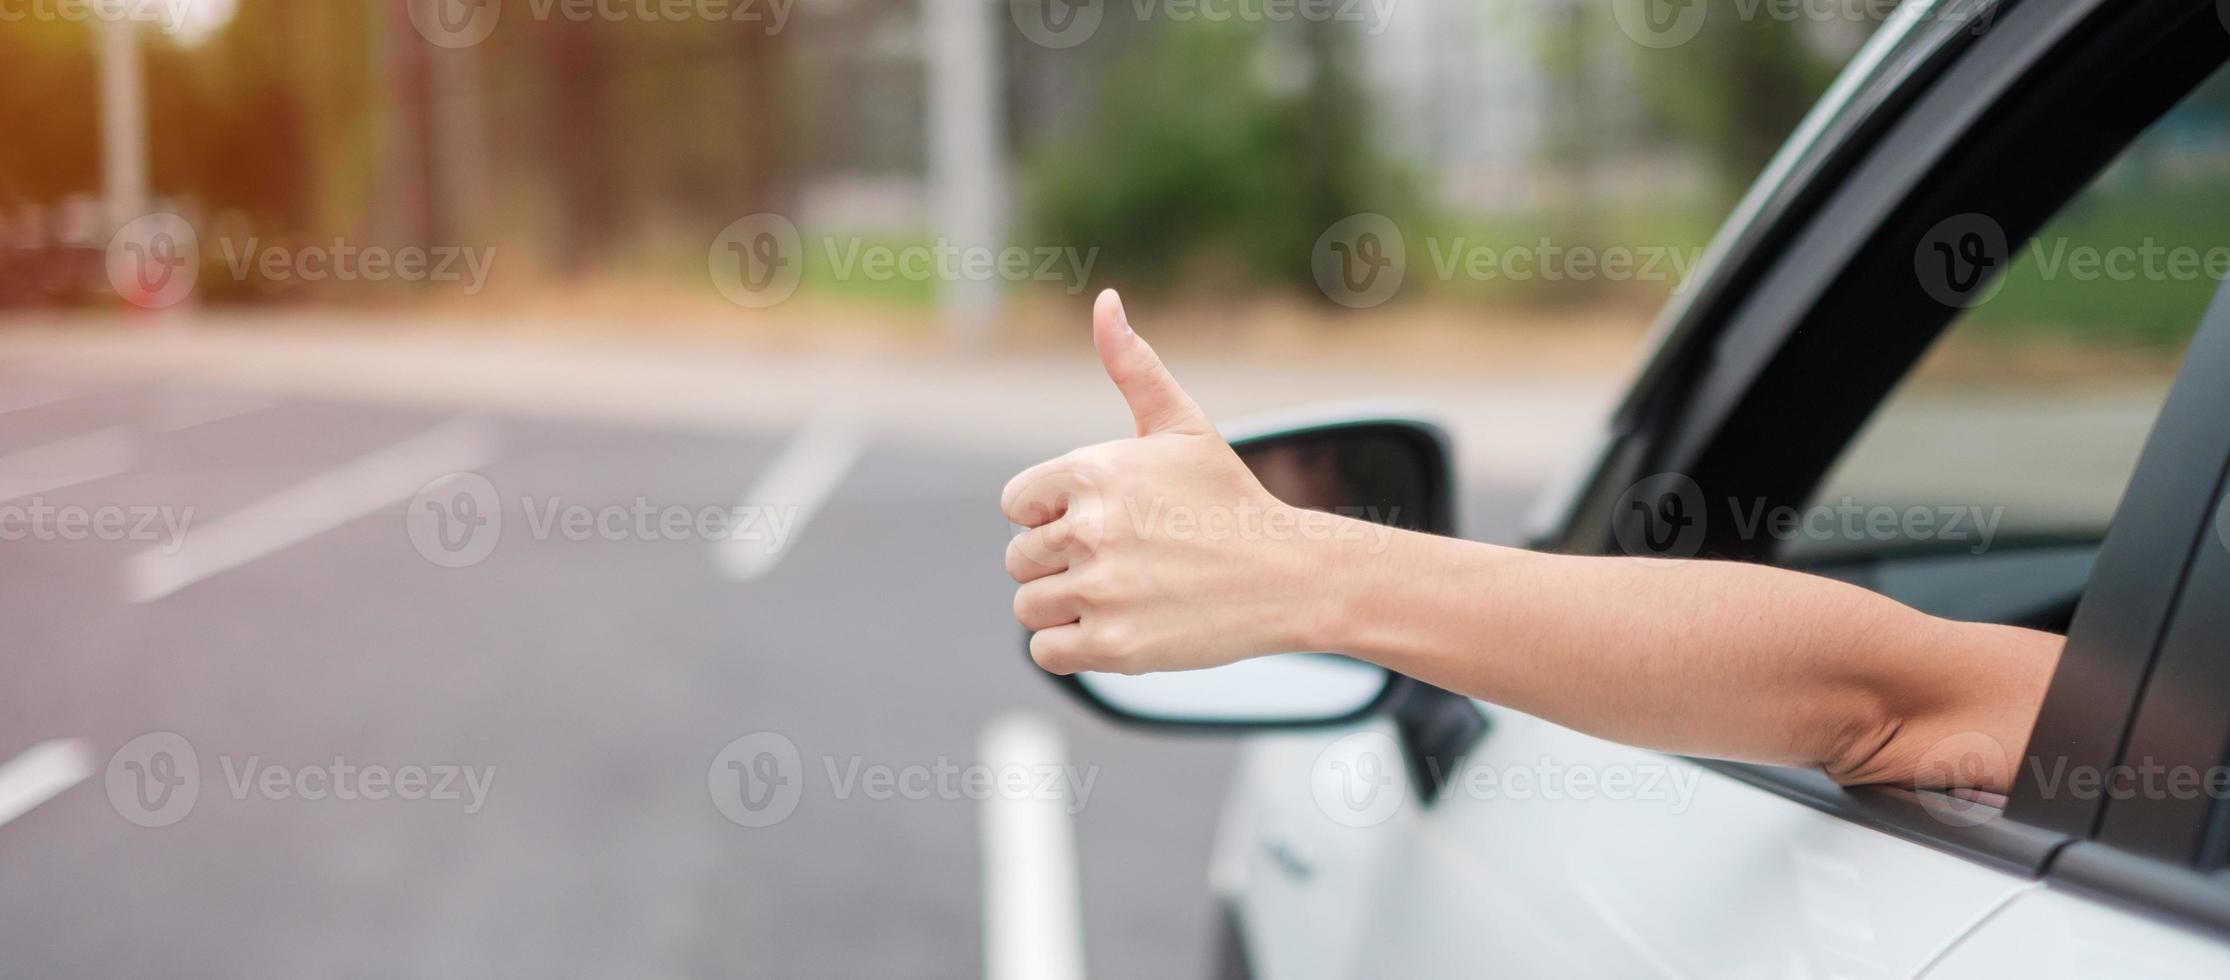 woman hand Thumb up during driving a car on the road, hand controlling steering wheel in electric modern automobile. Journey, trip and safety Transportation concepts photo